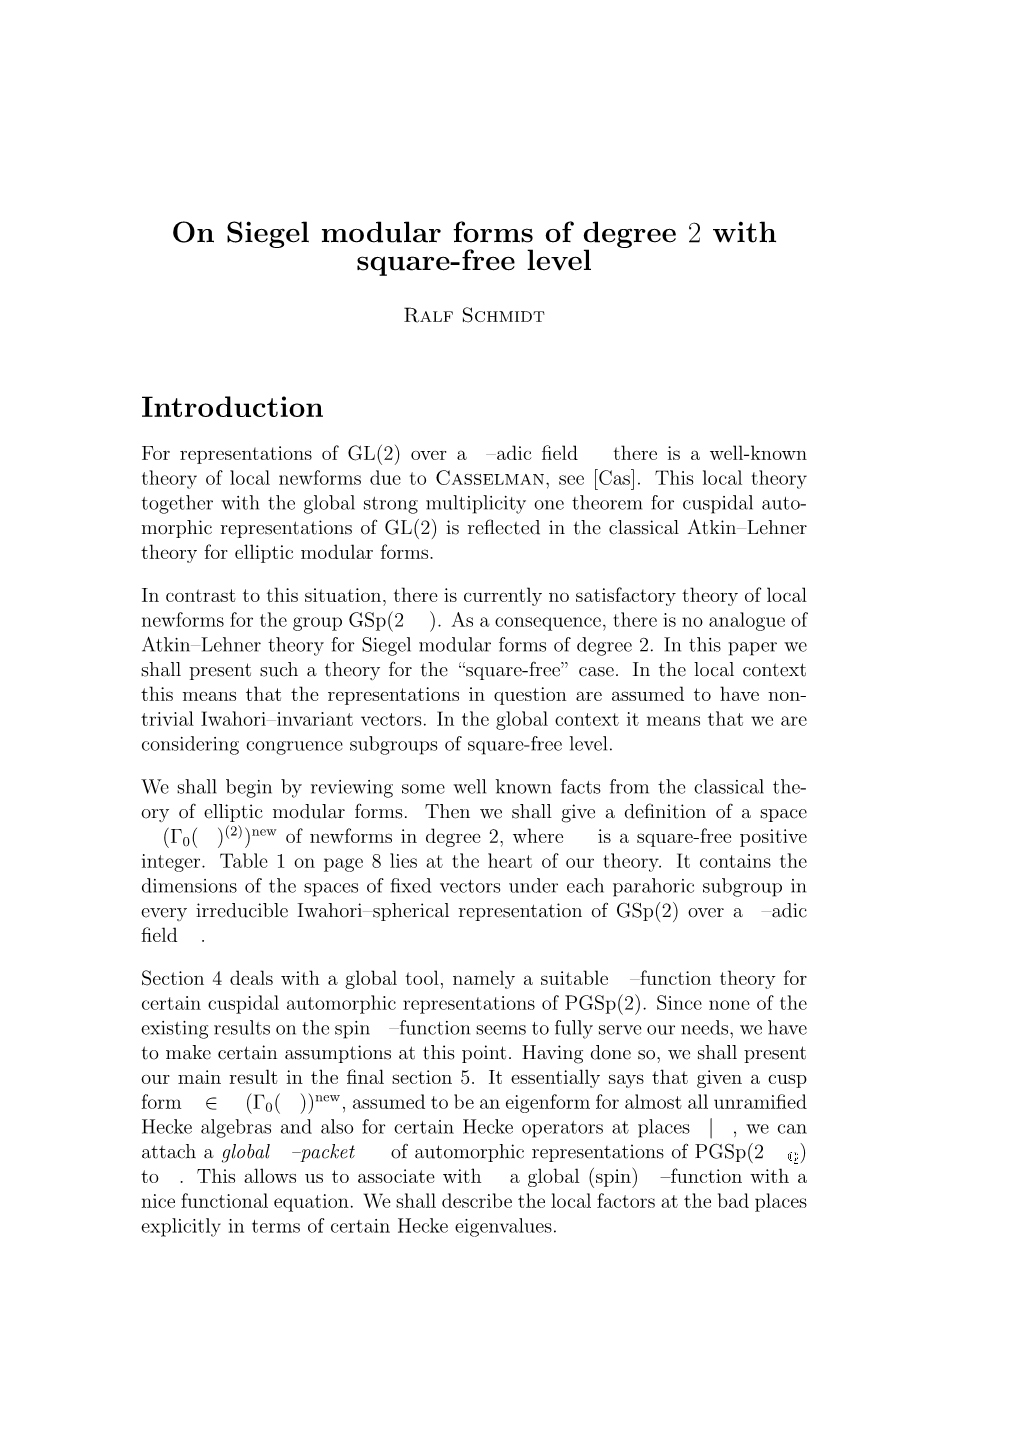 On Siegel Modular Forms of Degree 2 with Square-Free Level